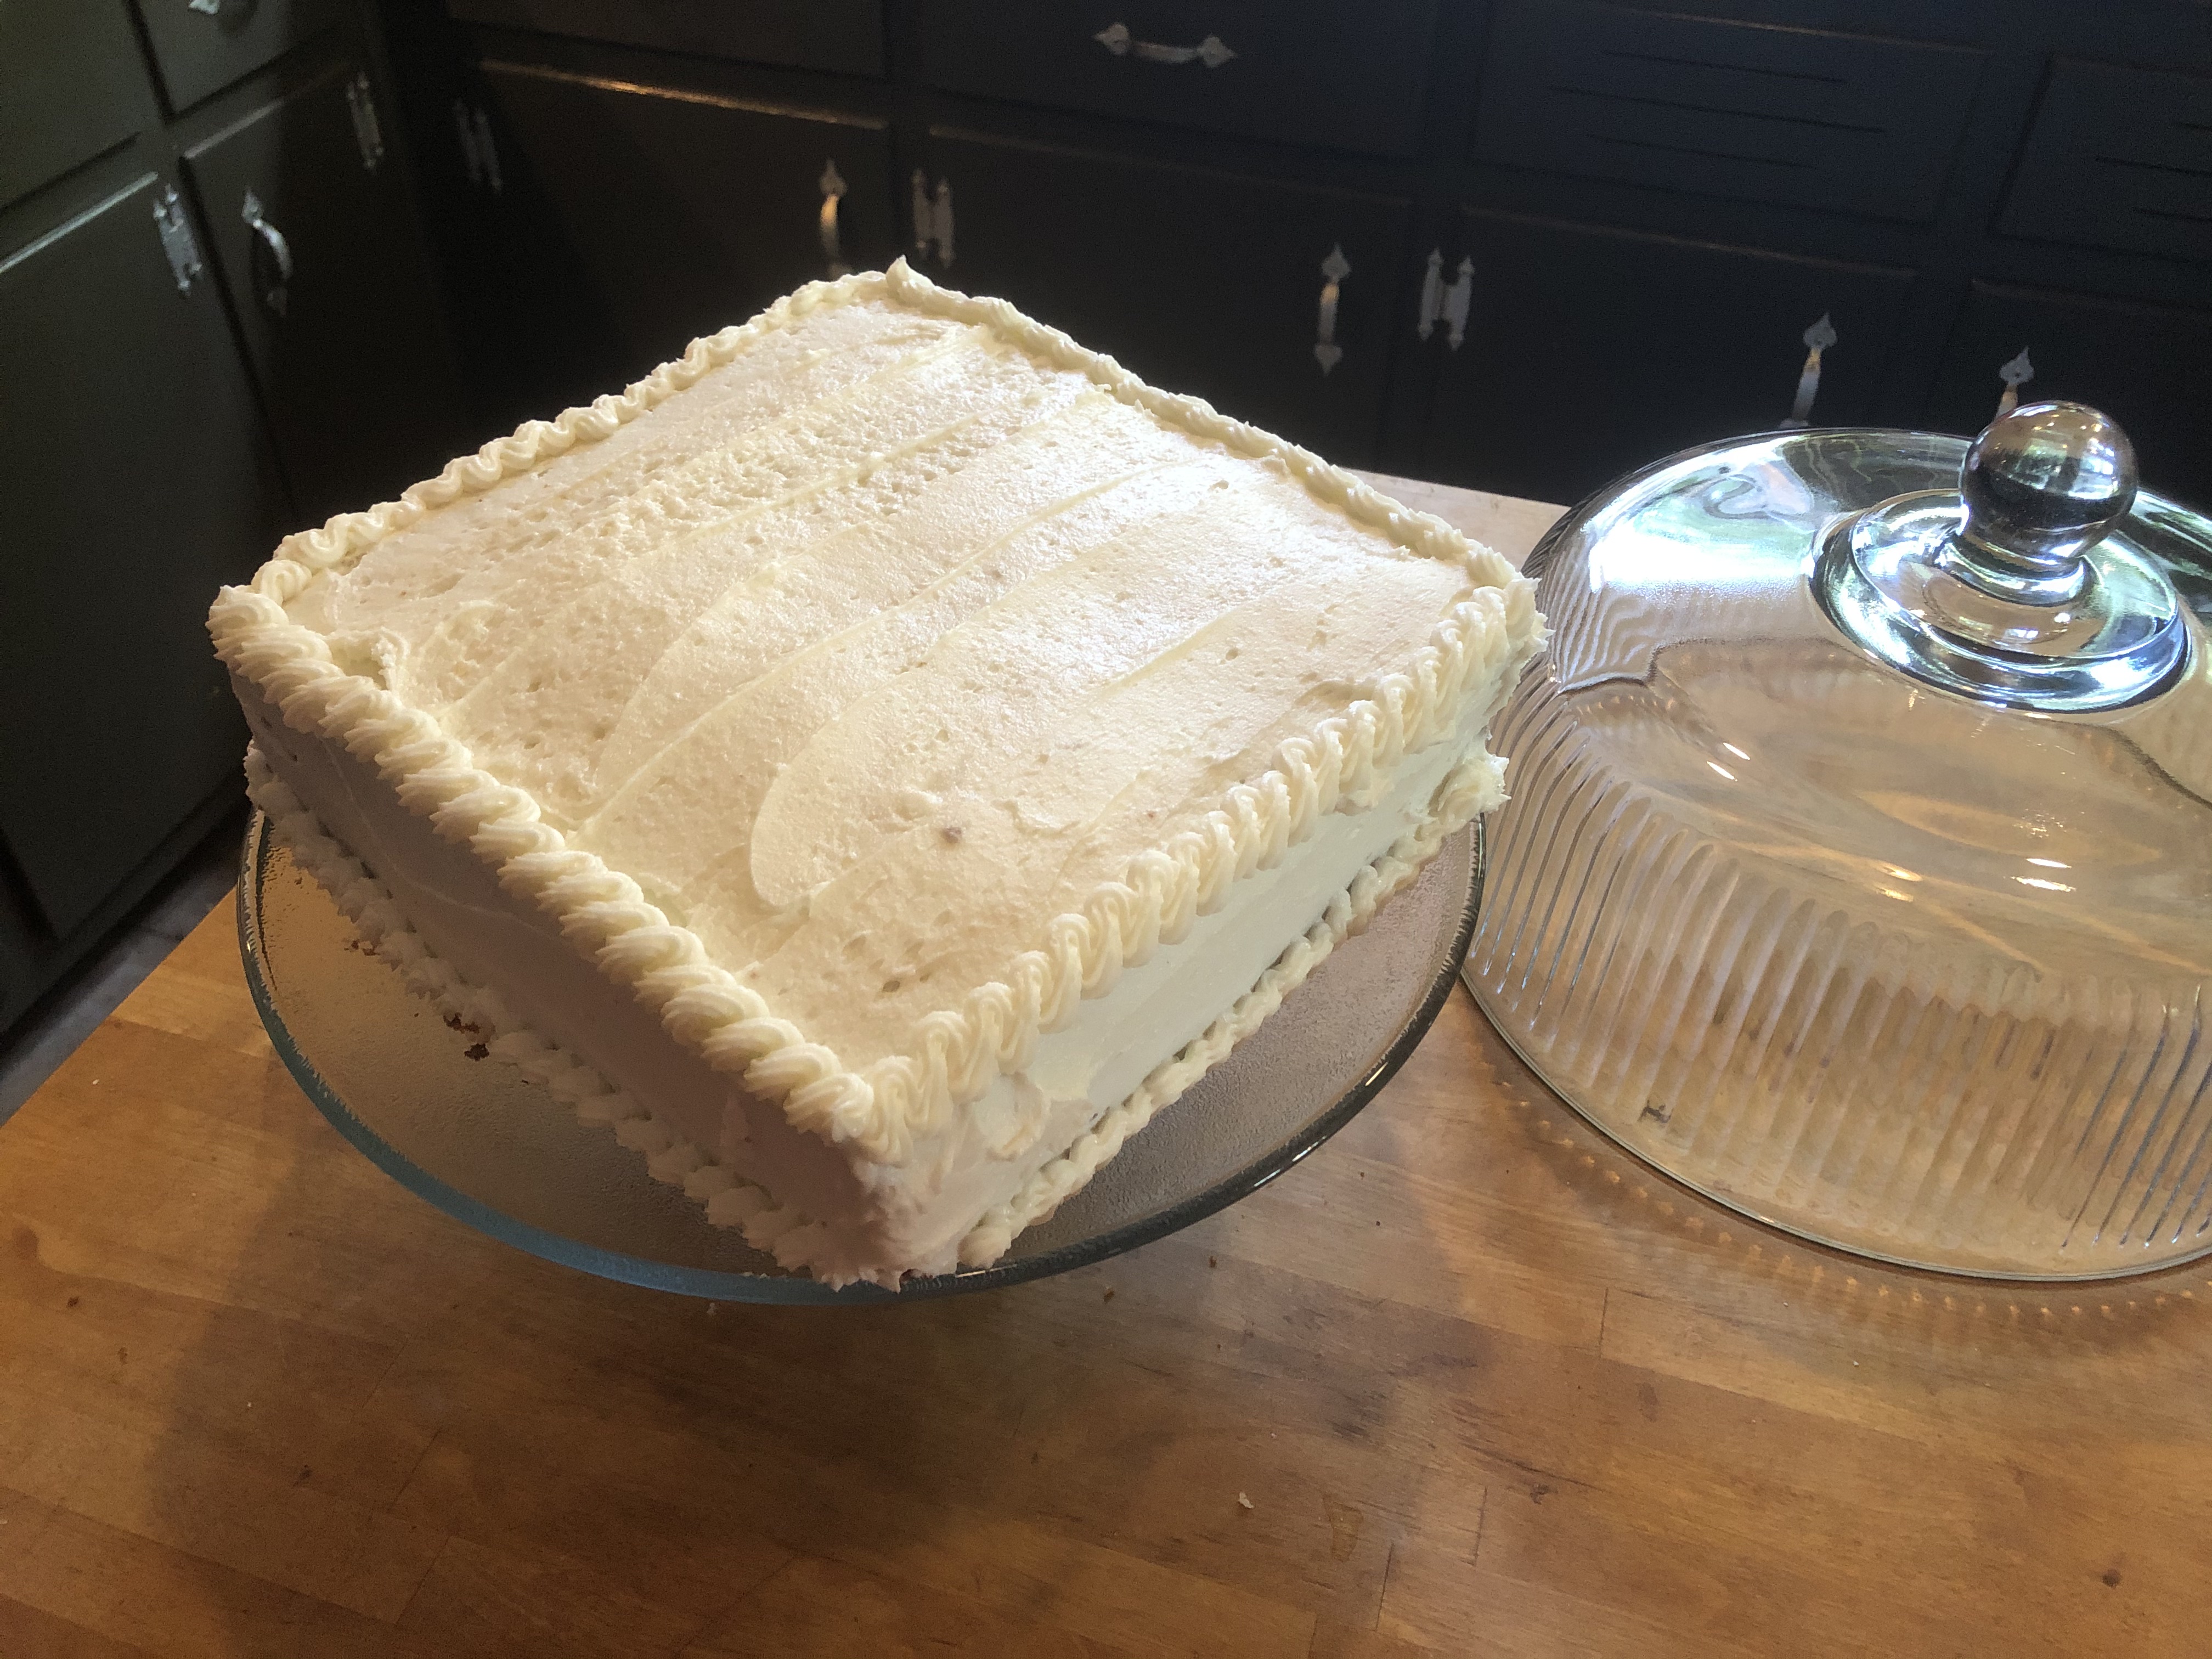 A square white frosted cake on a round cake plate